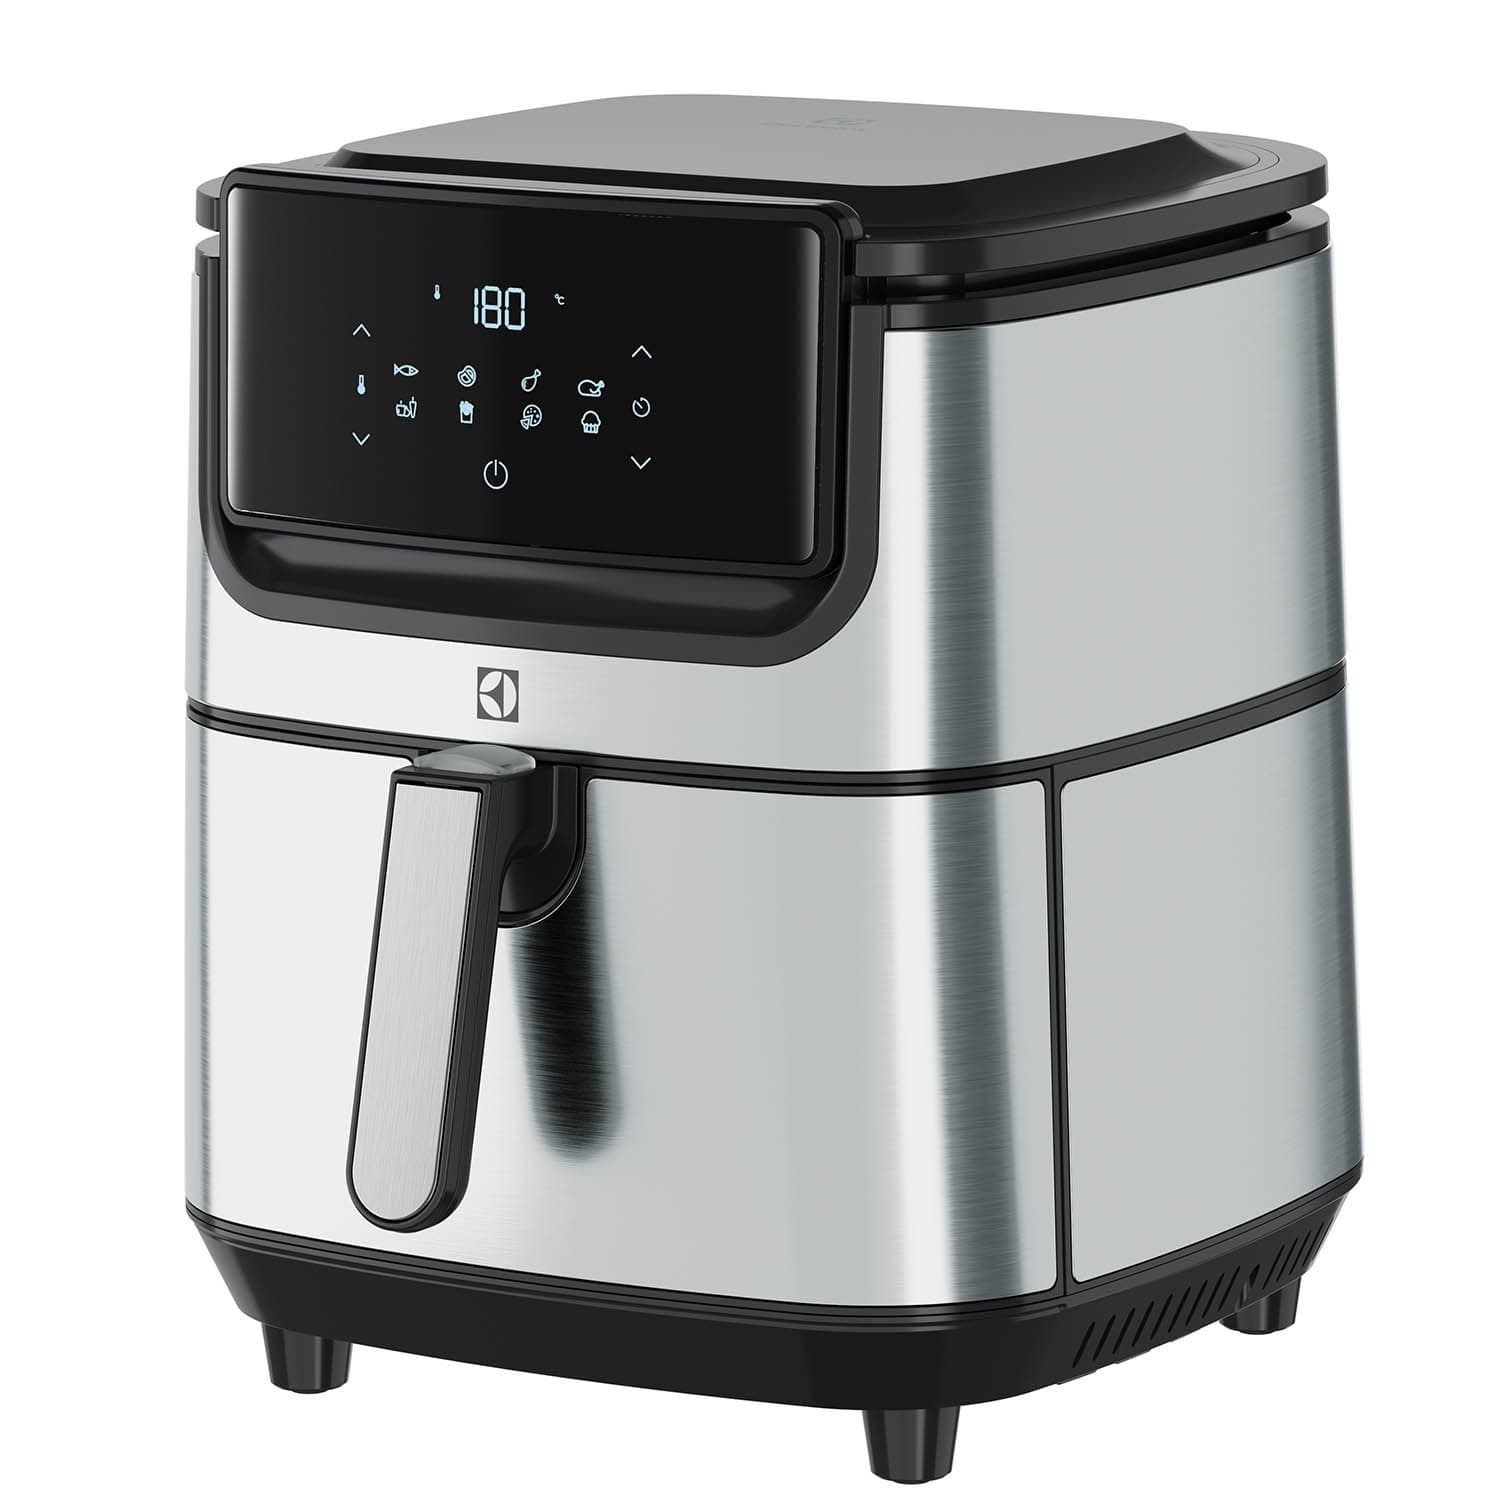 ELECTROLUX EXPLORE 6 AIR FRYER 5.4L STAINLESS STEEL - E6AF1-720S